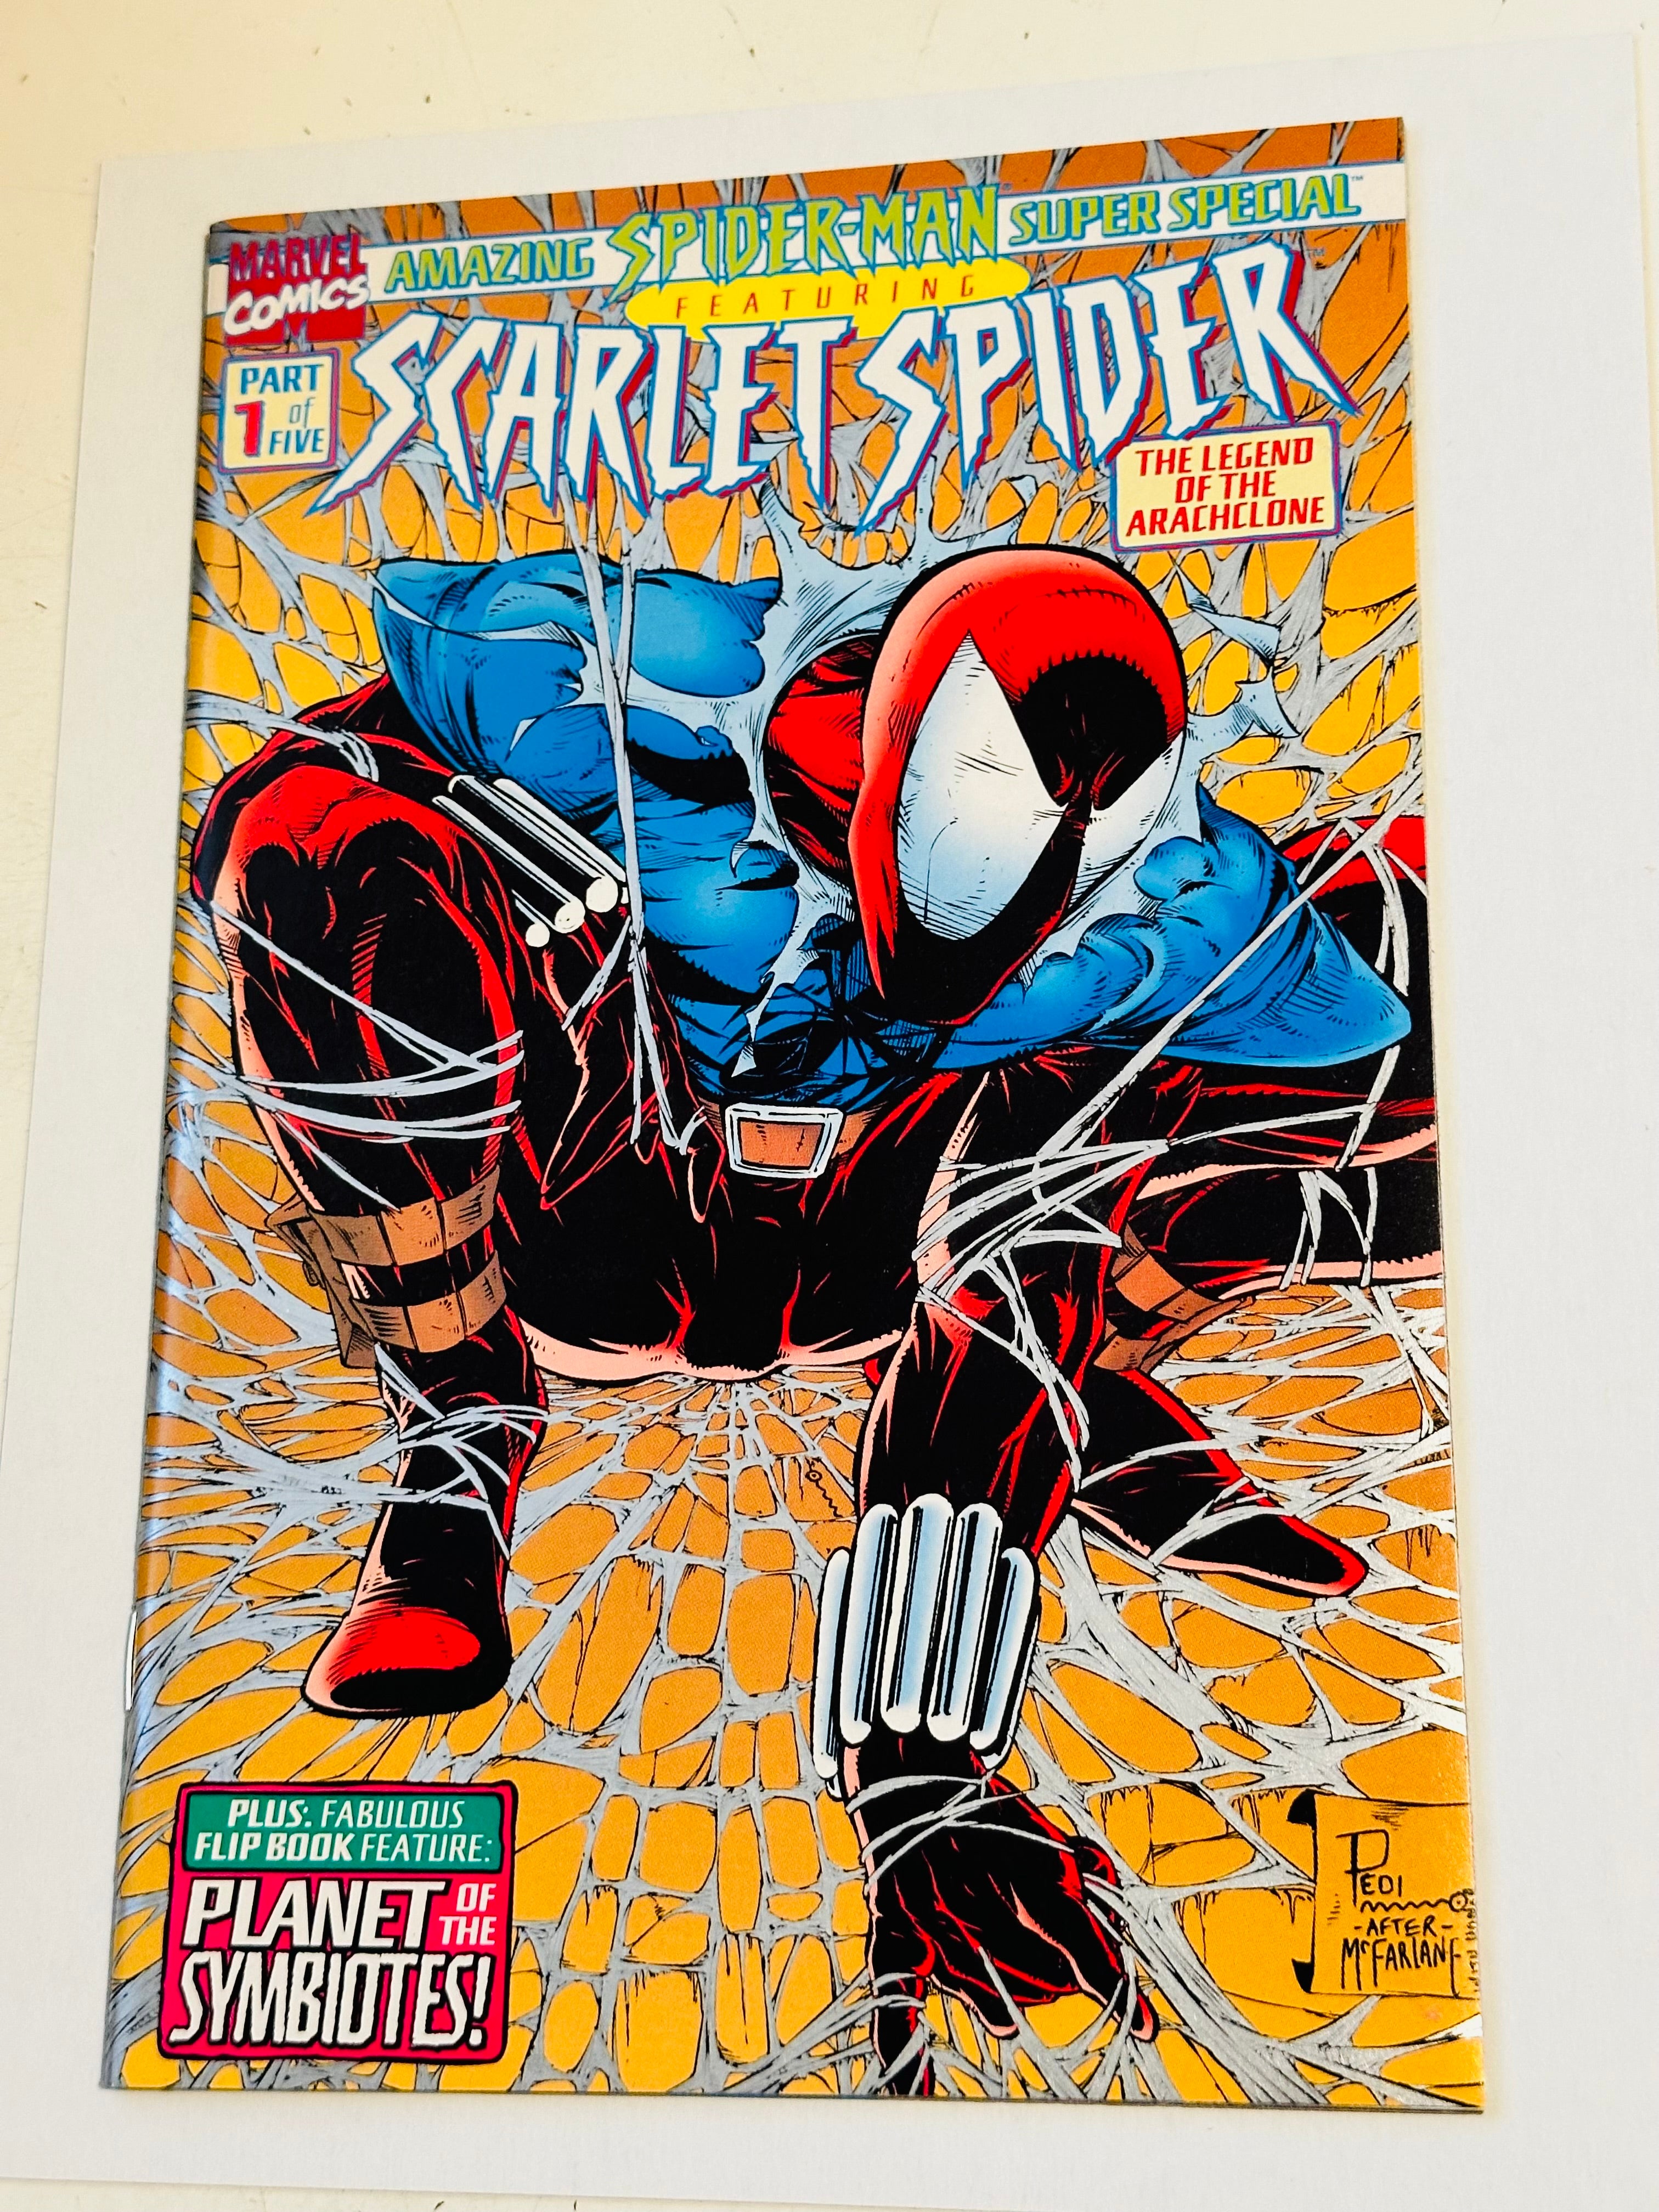 Amazing Spider-Man super special number one plan of the symbiots two cover comic.